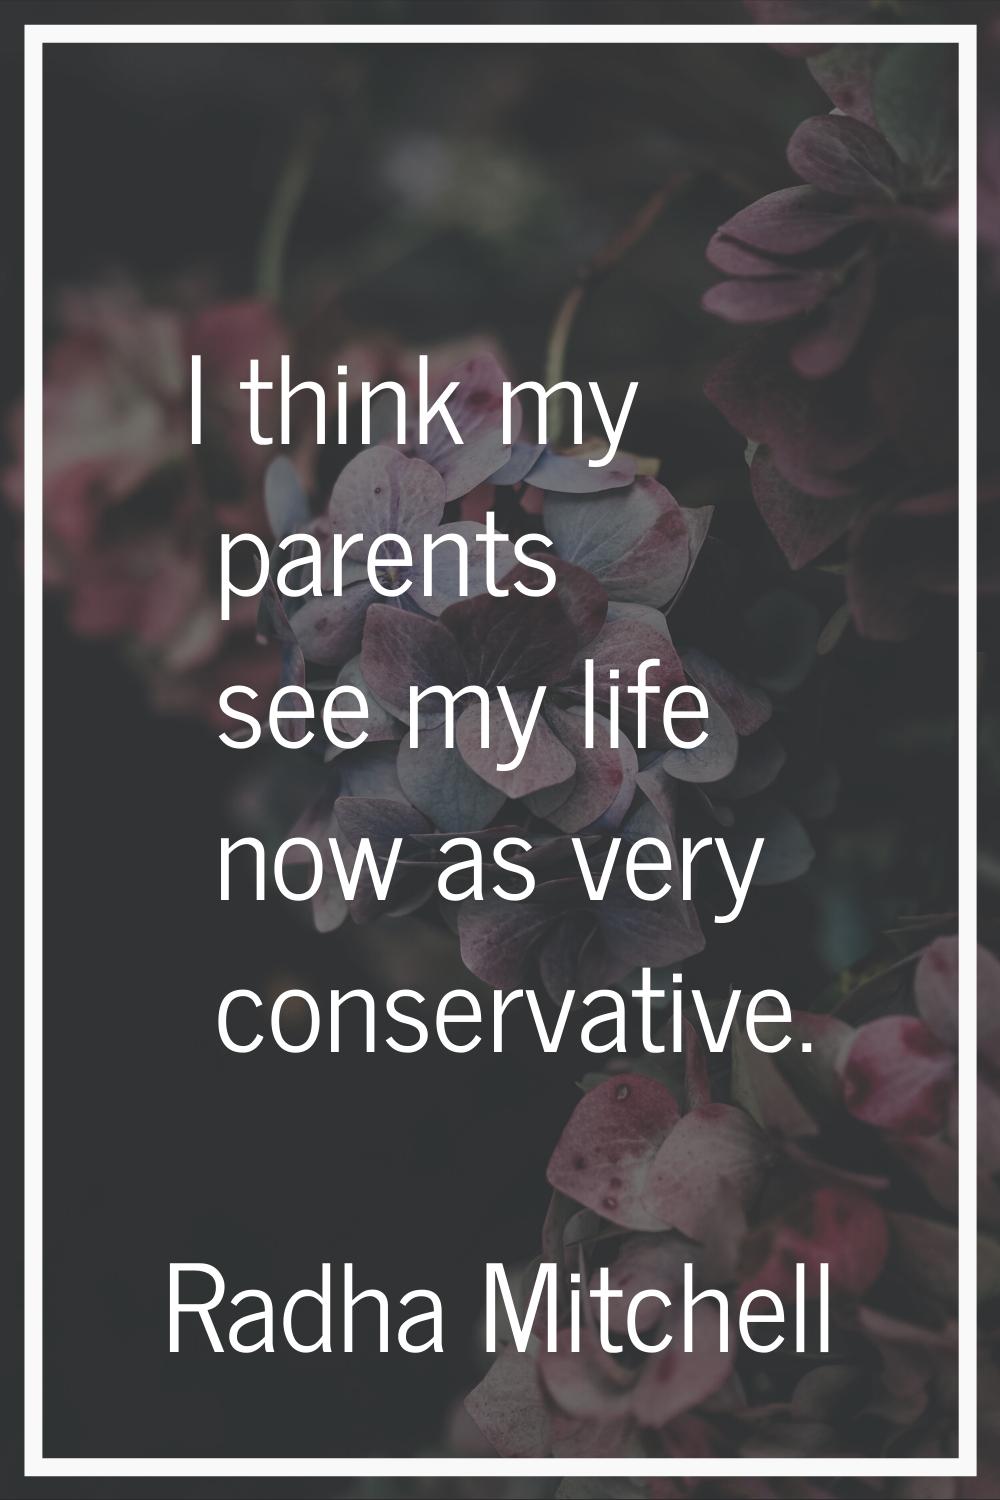 I think my parents see my life now as very conservative.